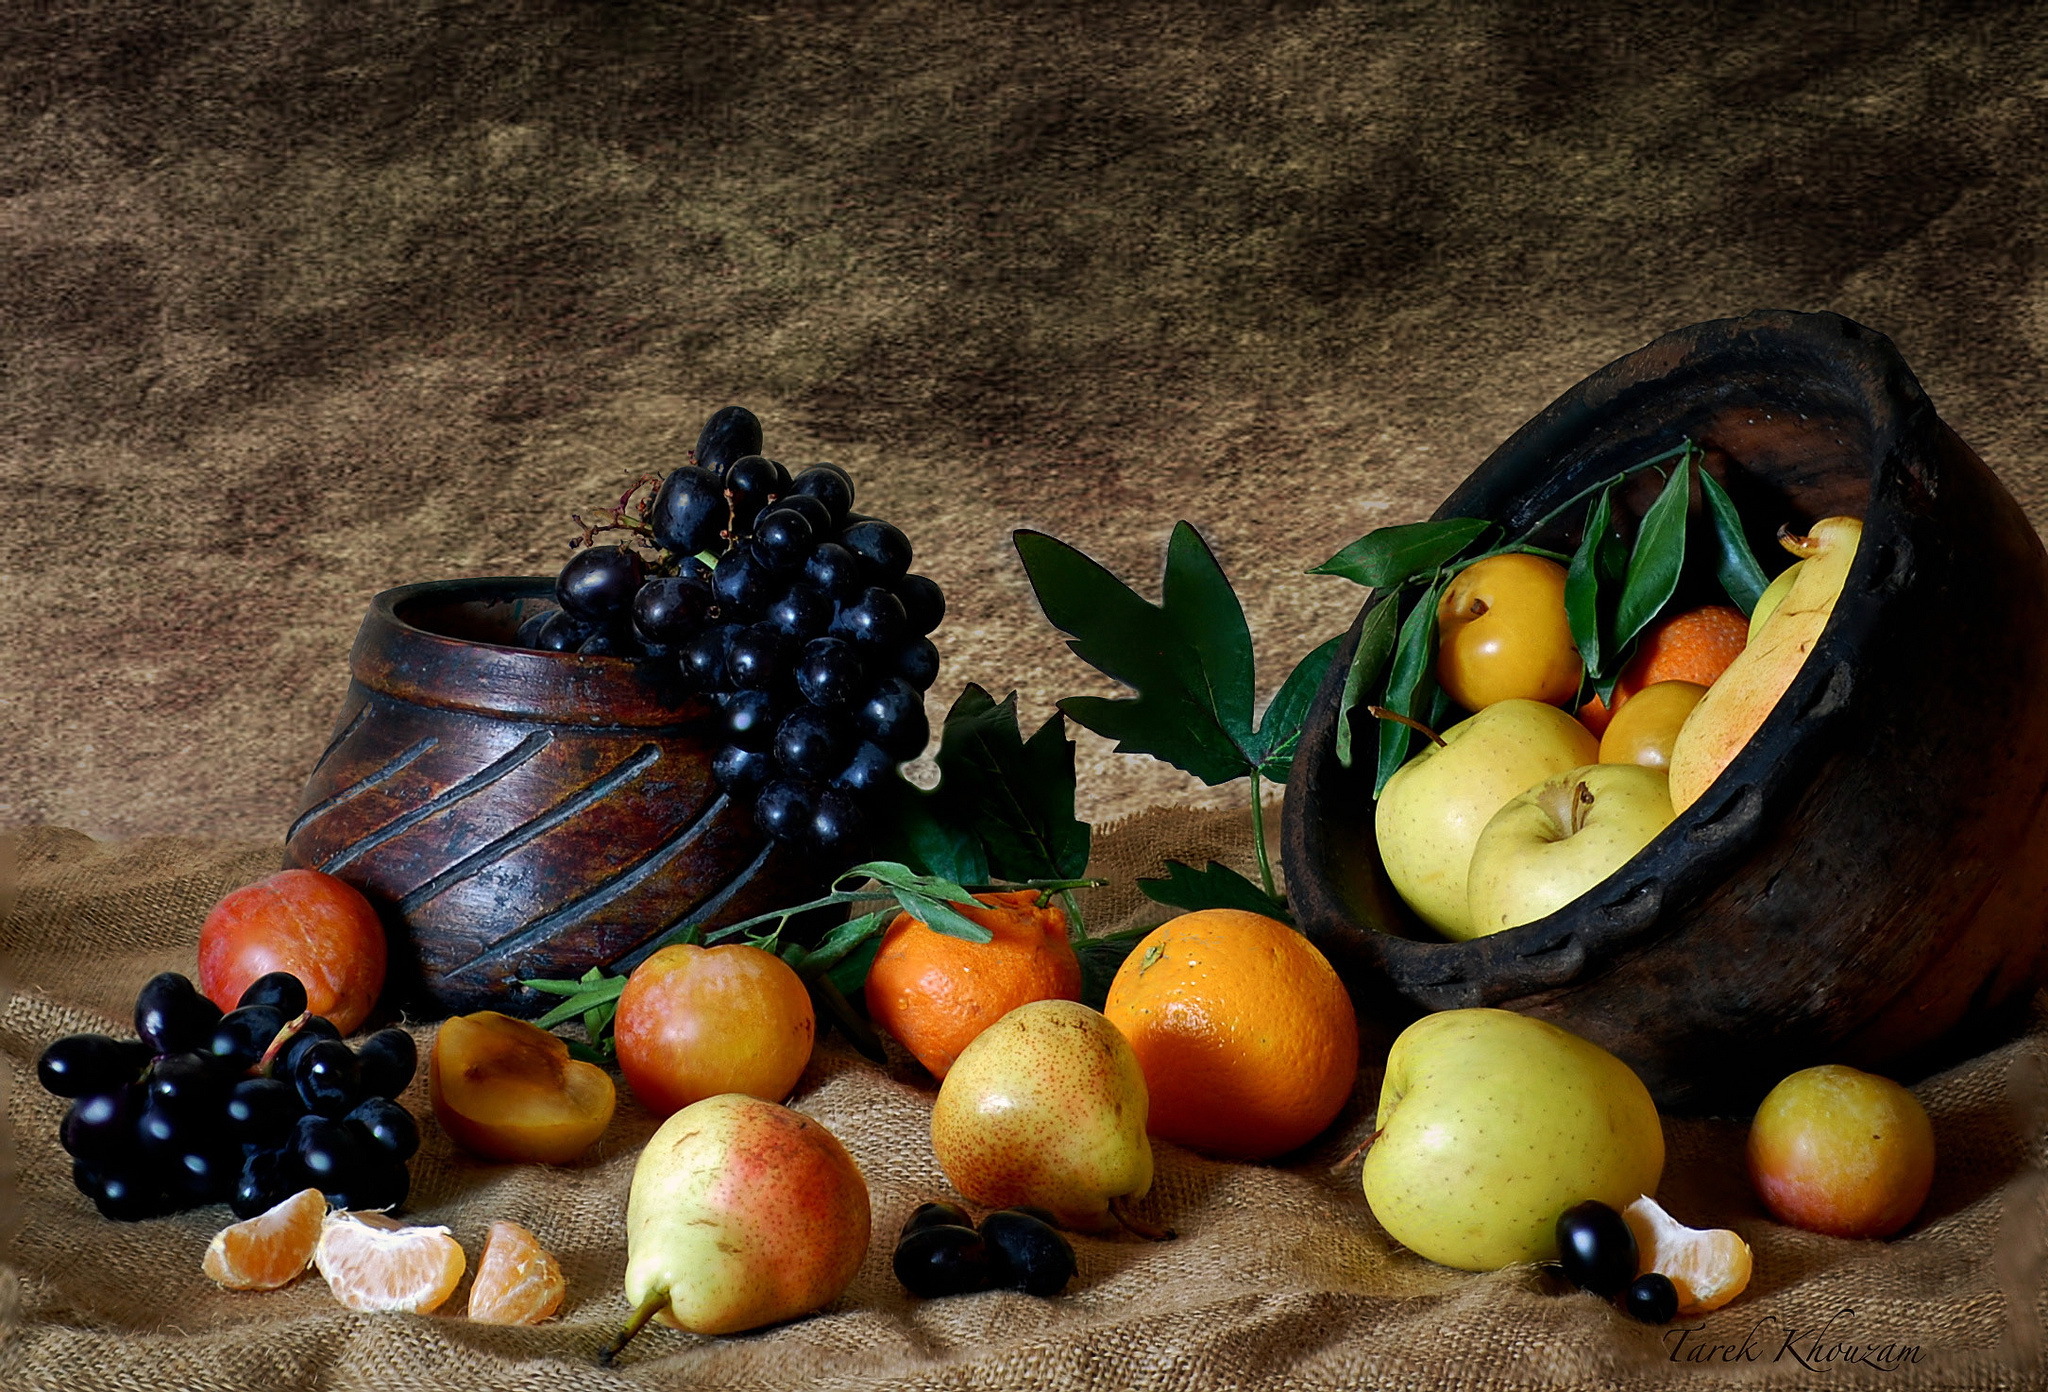 560+ Fruit HD Wallpapers and Backgrounds